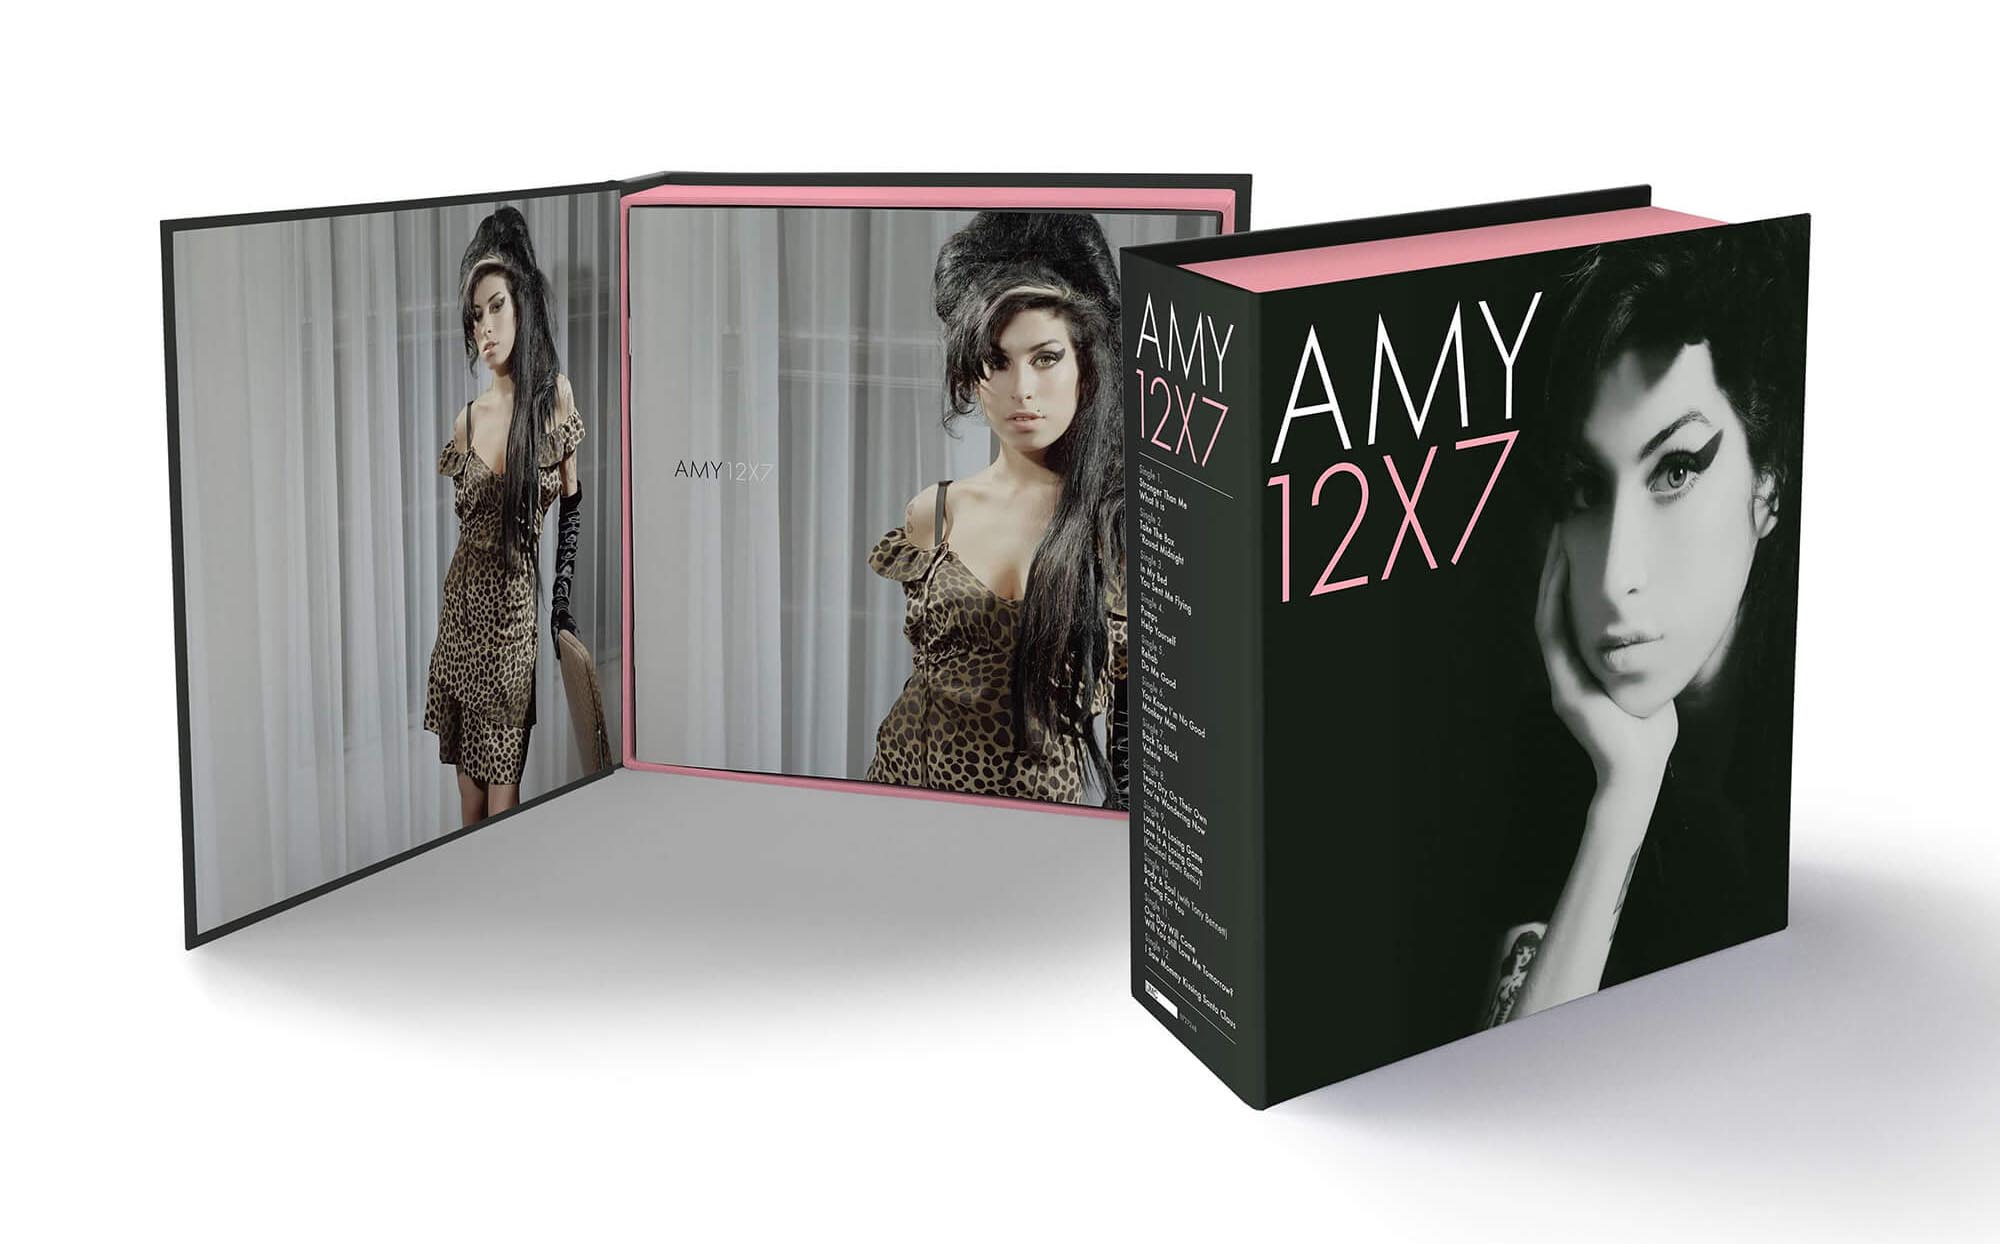 Amy Winehouse-12x7- The Singles Collection